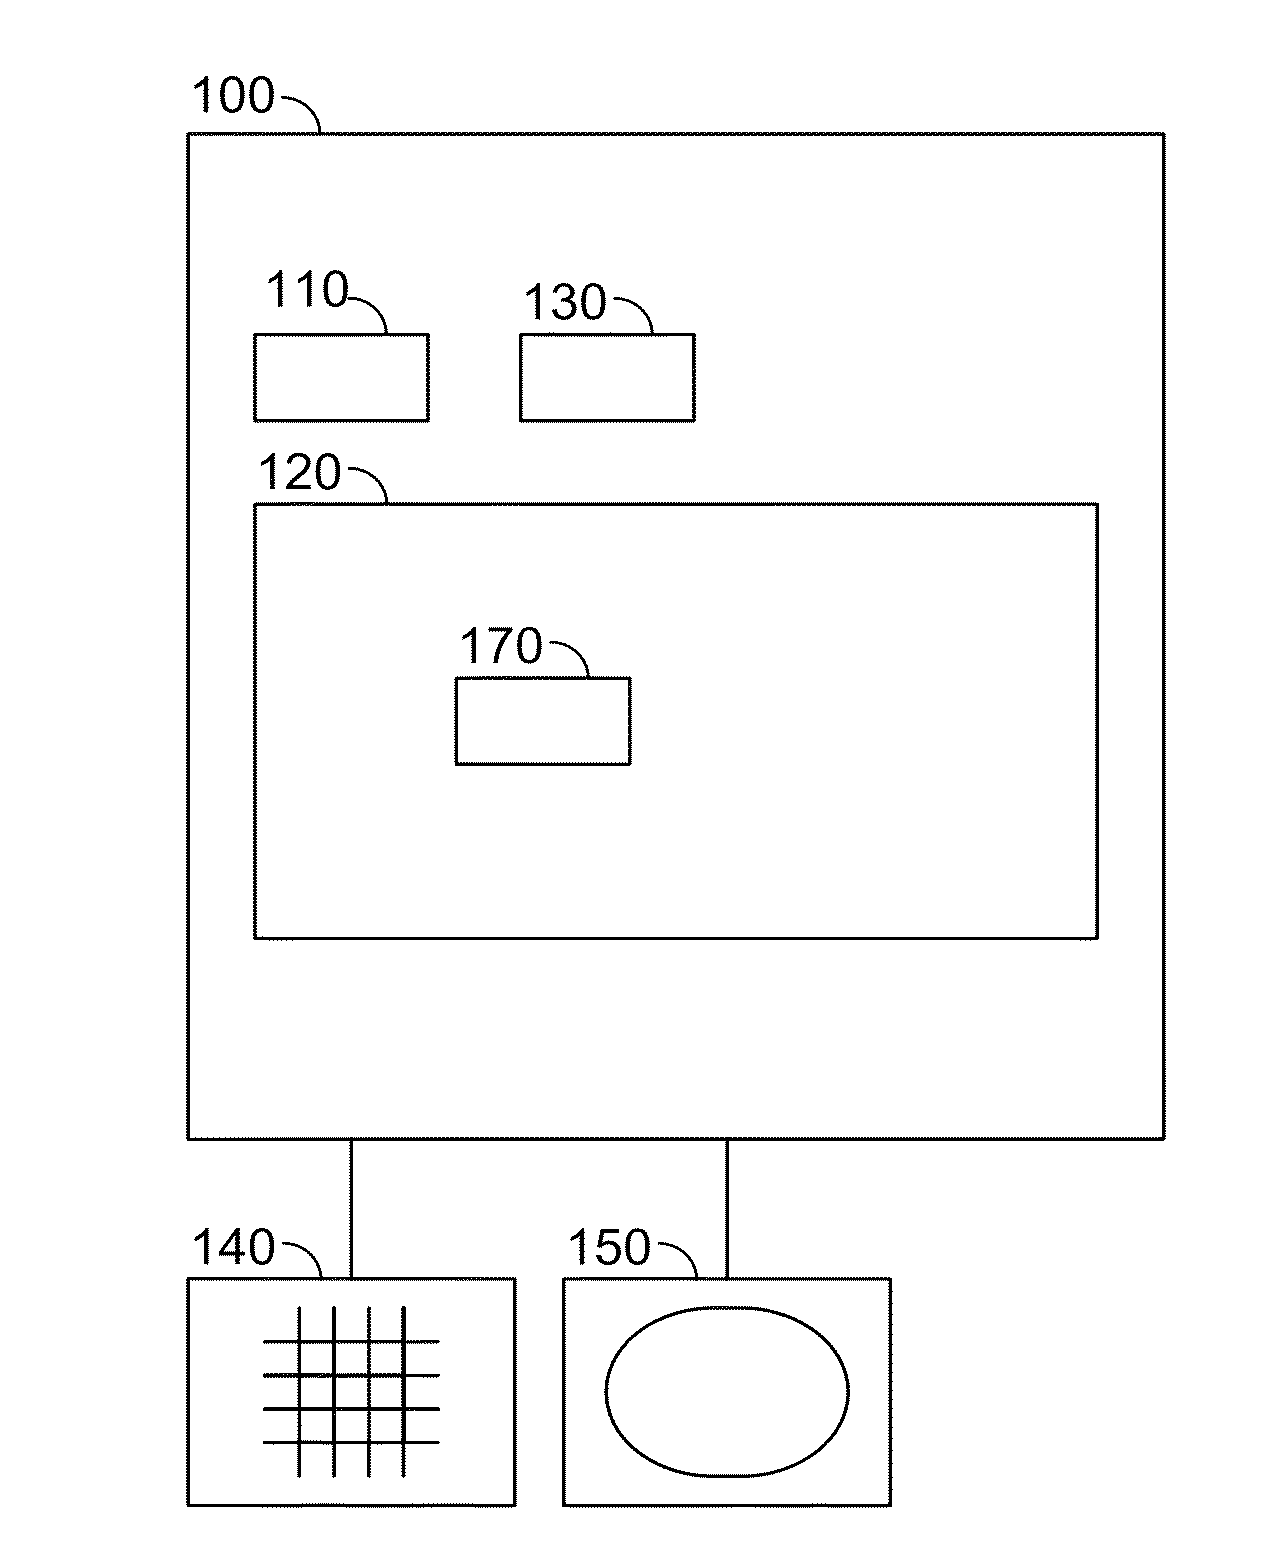 System and method for enhanced vehicle control